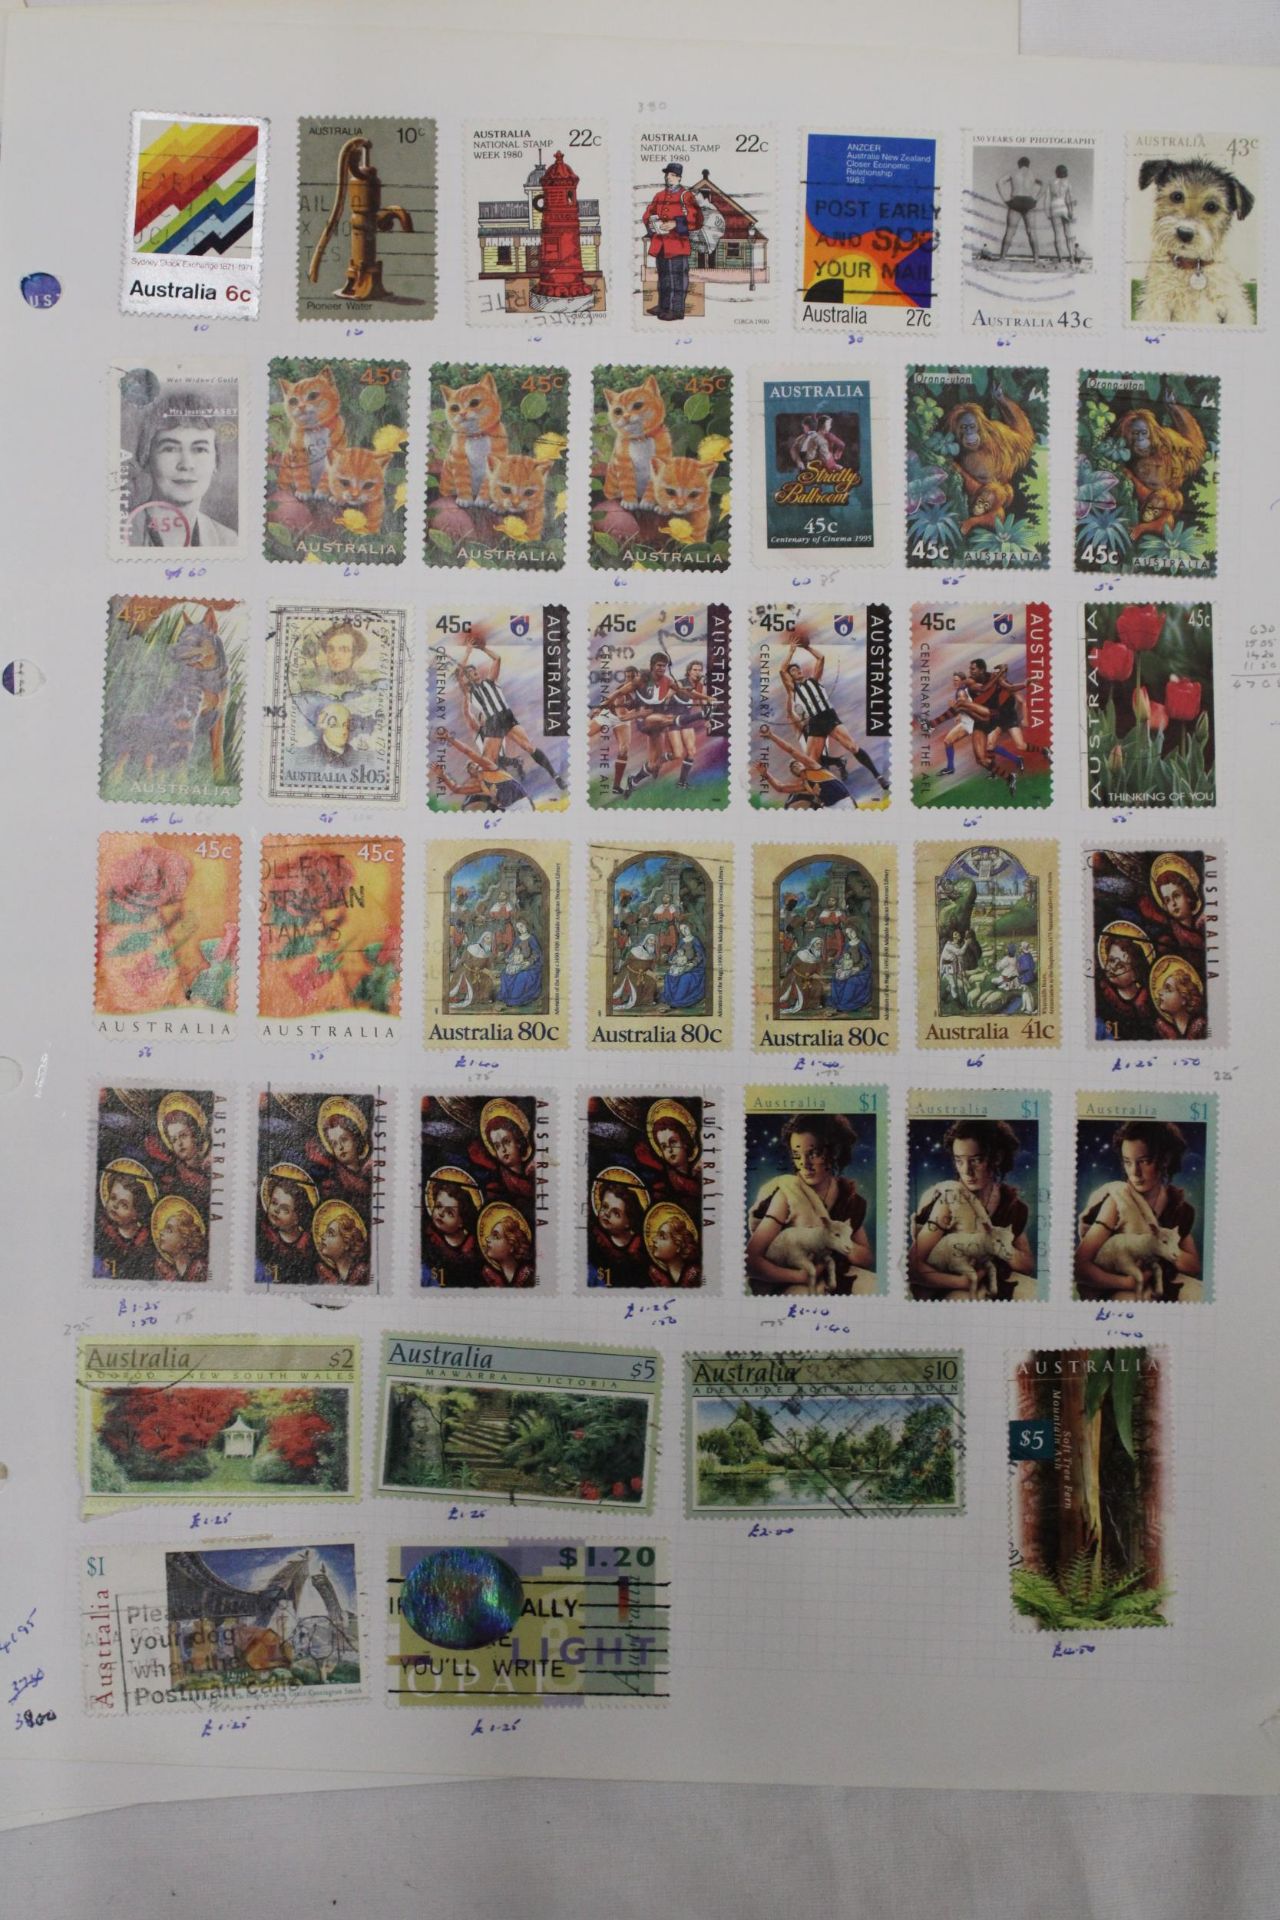 A COLLECTION OF CANADIAN STAMPS - Image 4 of 5